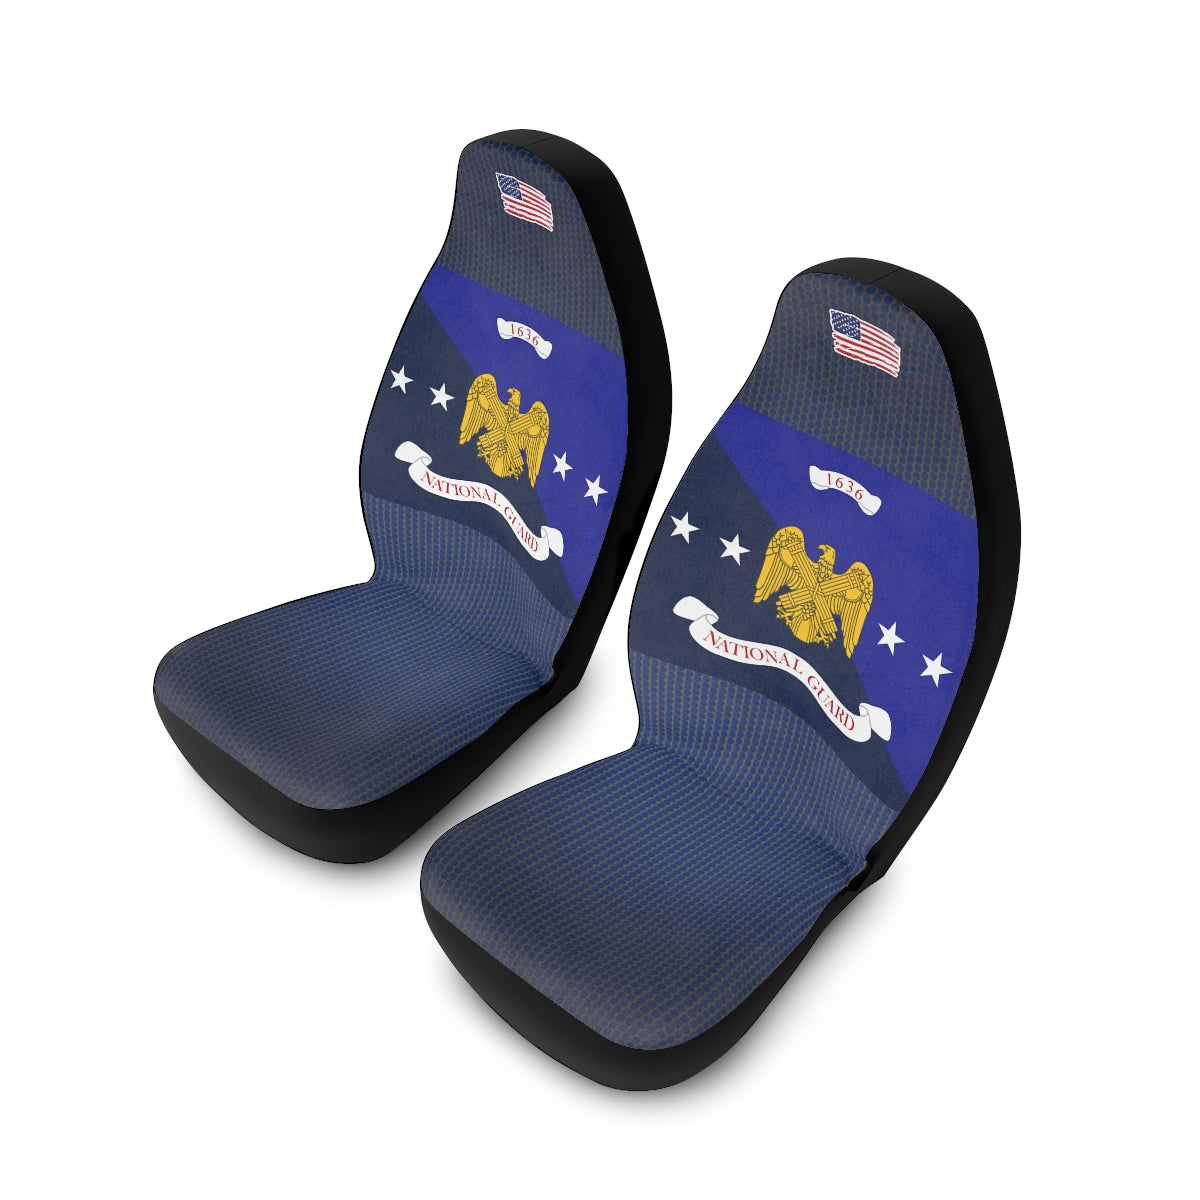 Army National Guard Dark Blue Car Seat Covers: Military precision meets style. Durable, custom-fit covers for a patriotic touch. 🇺🇸💙🚗